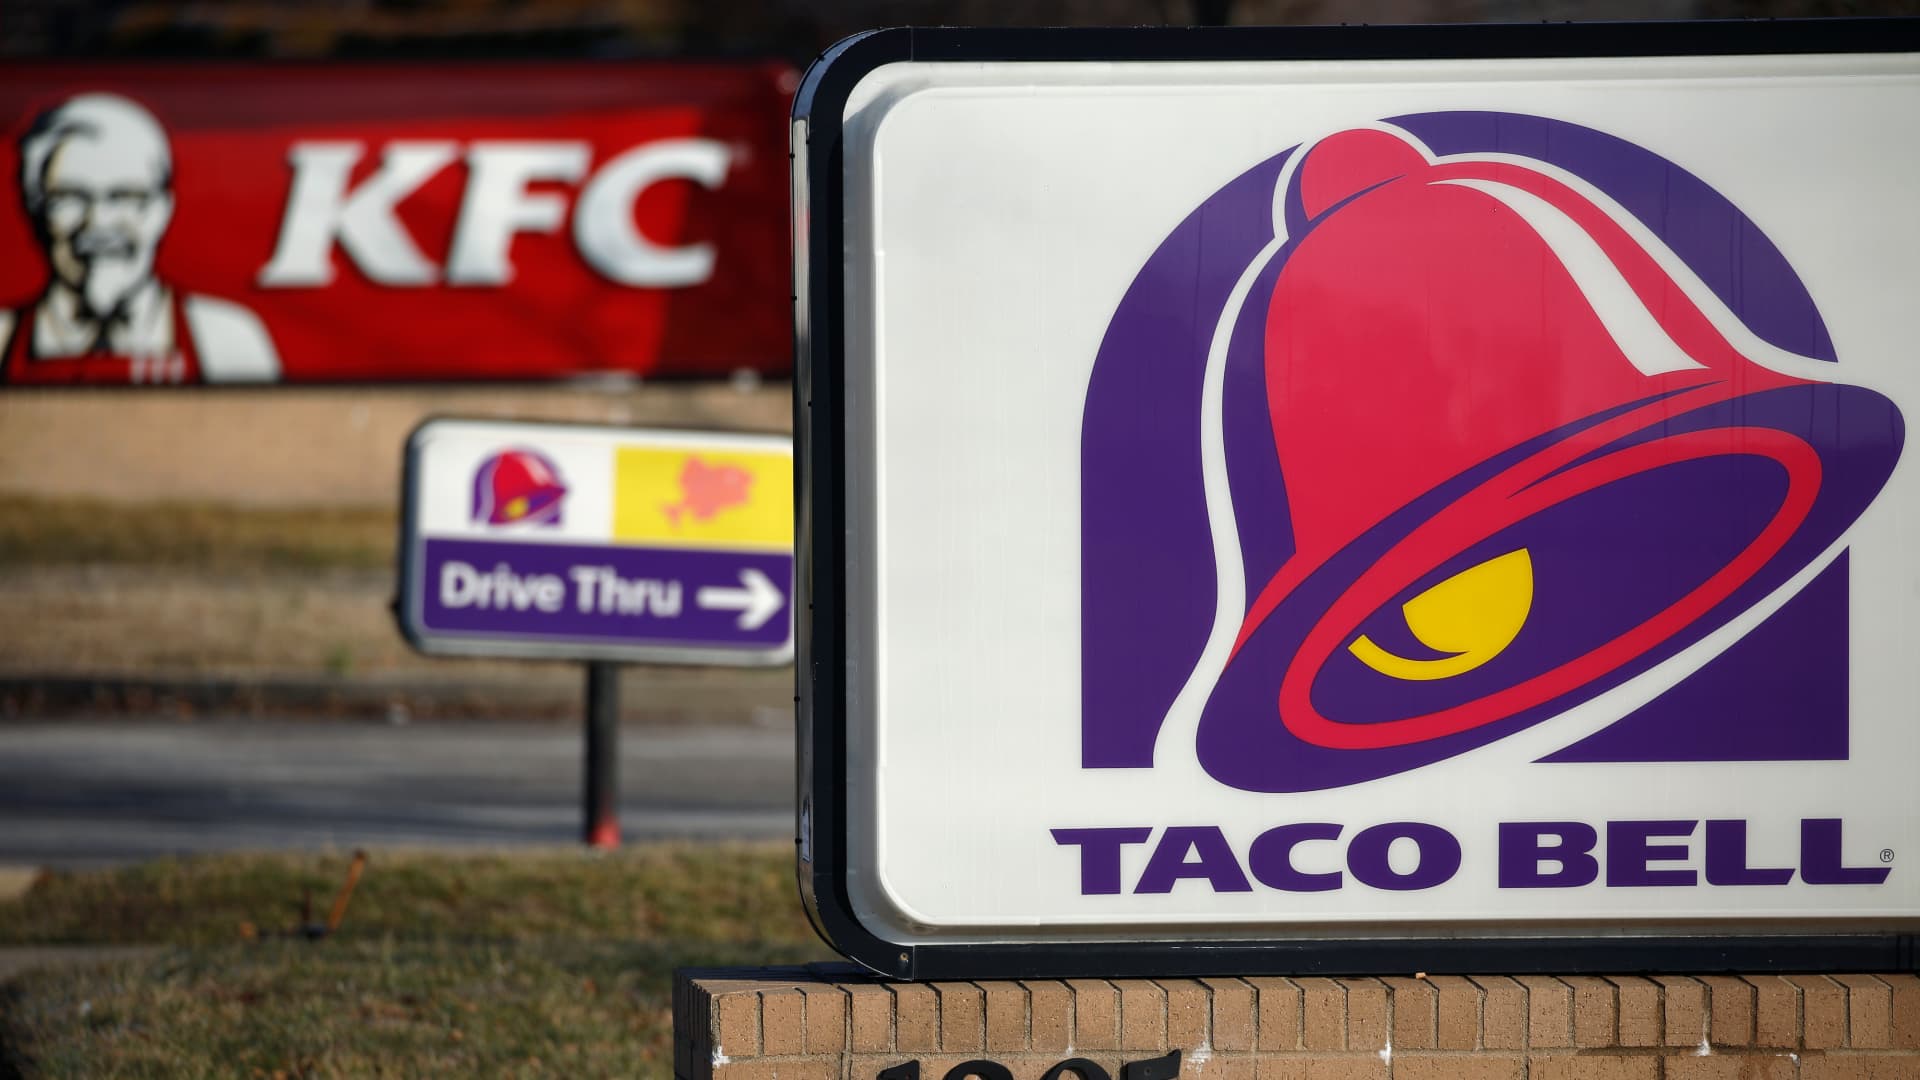 Strong dollar weighs on Yum Brands even as sales rise at KFC and Taco Bell